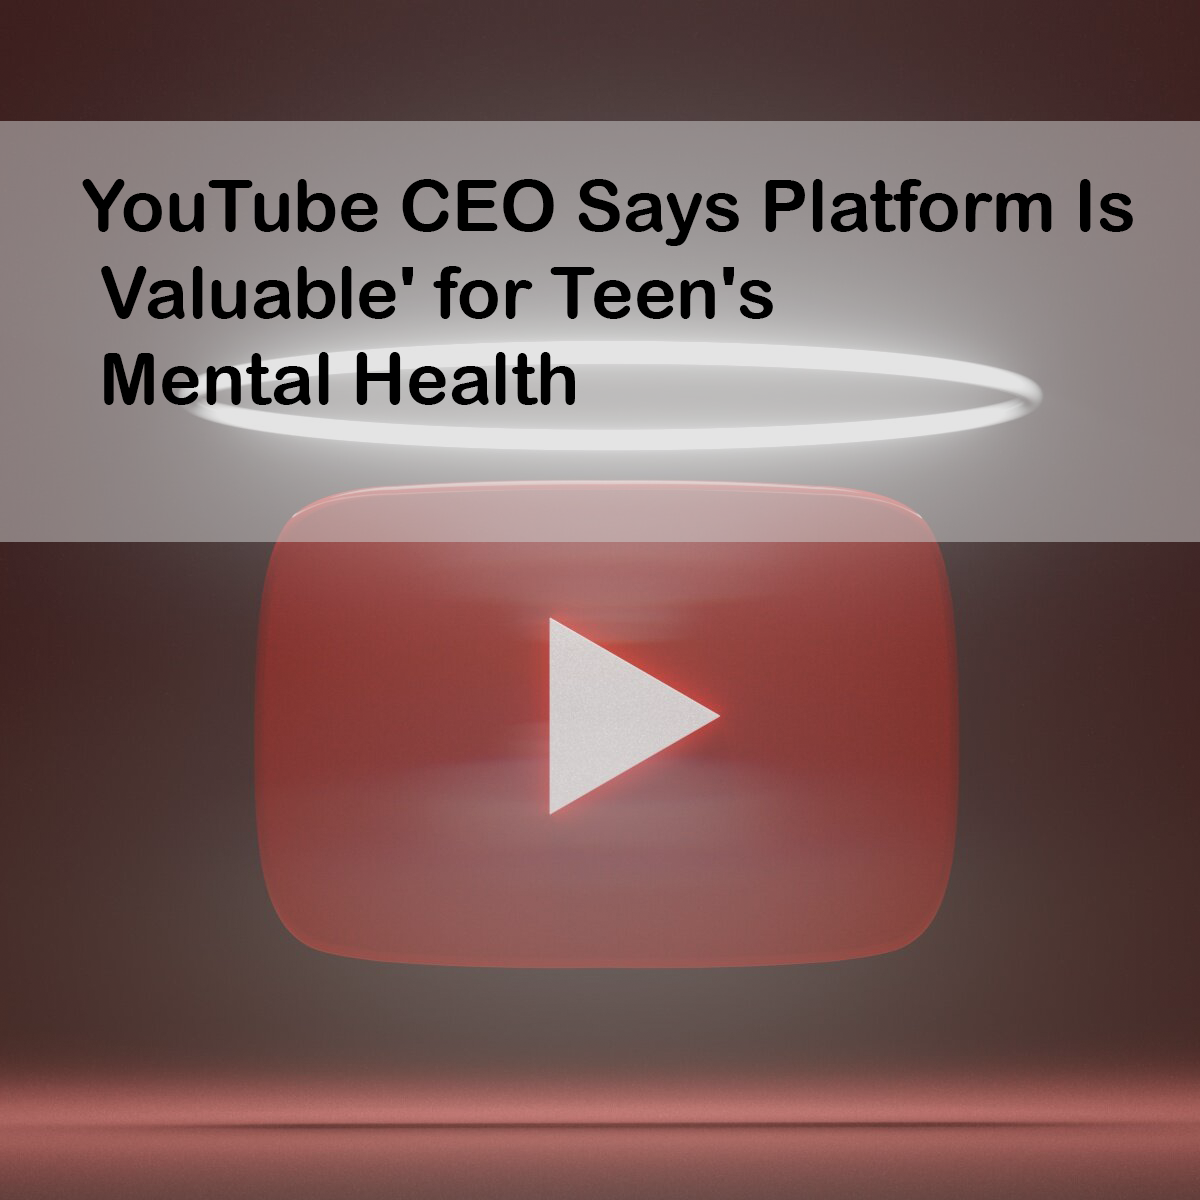 YouTube CEO Says Platform Is Valuable' for Teen's Mental Health